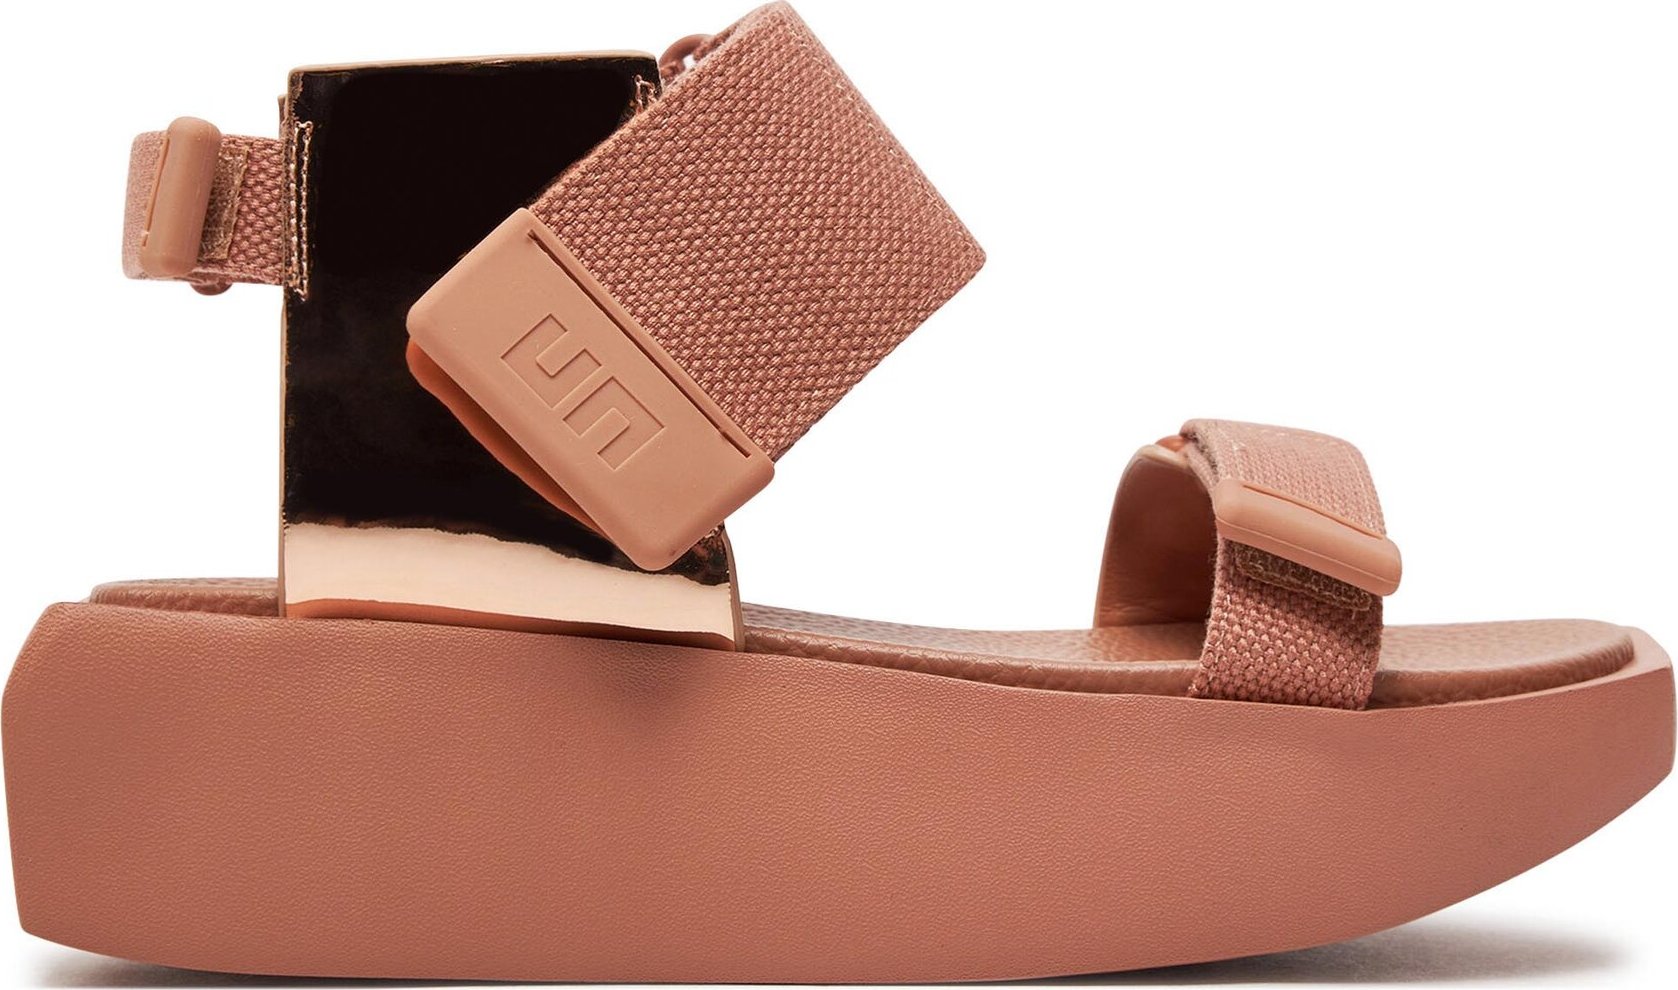 Sandály United Nude Wa Lo 1062622213 Rose Gold